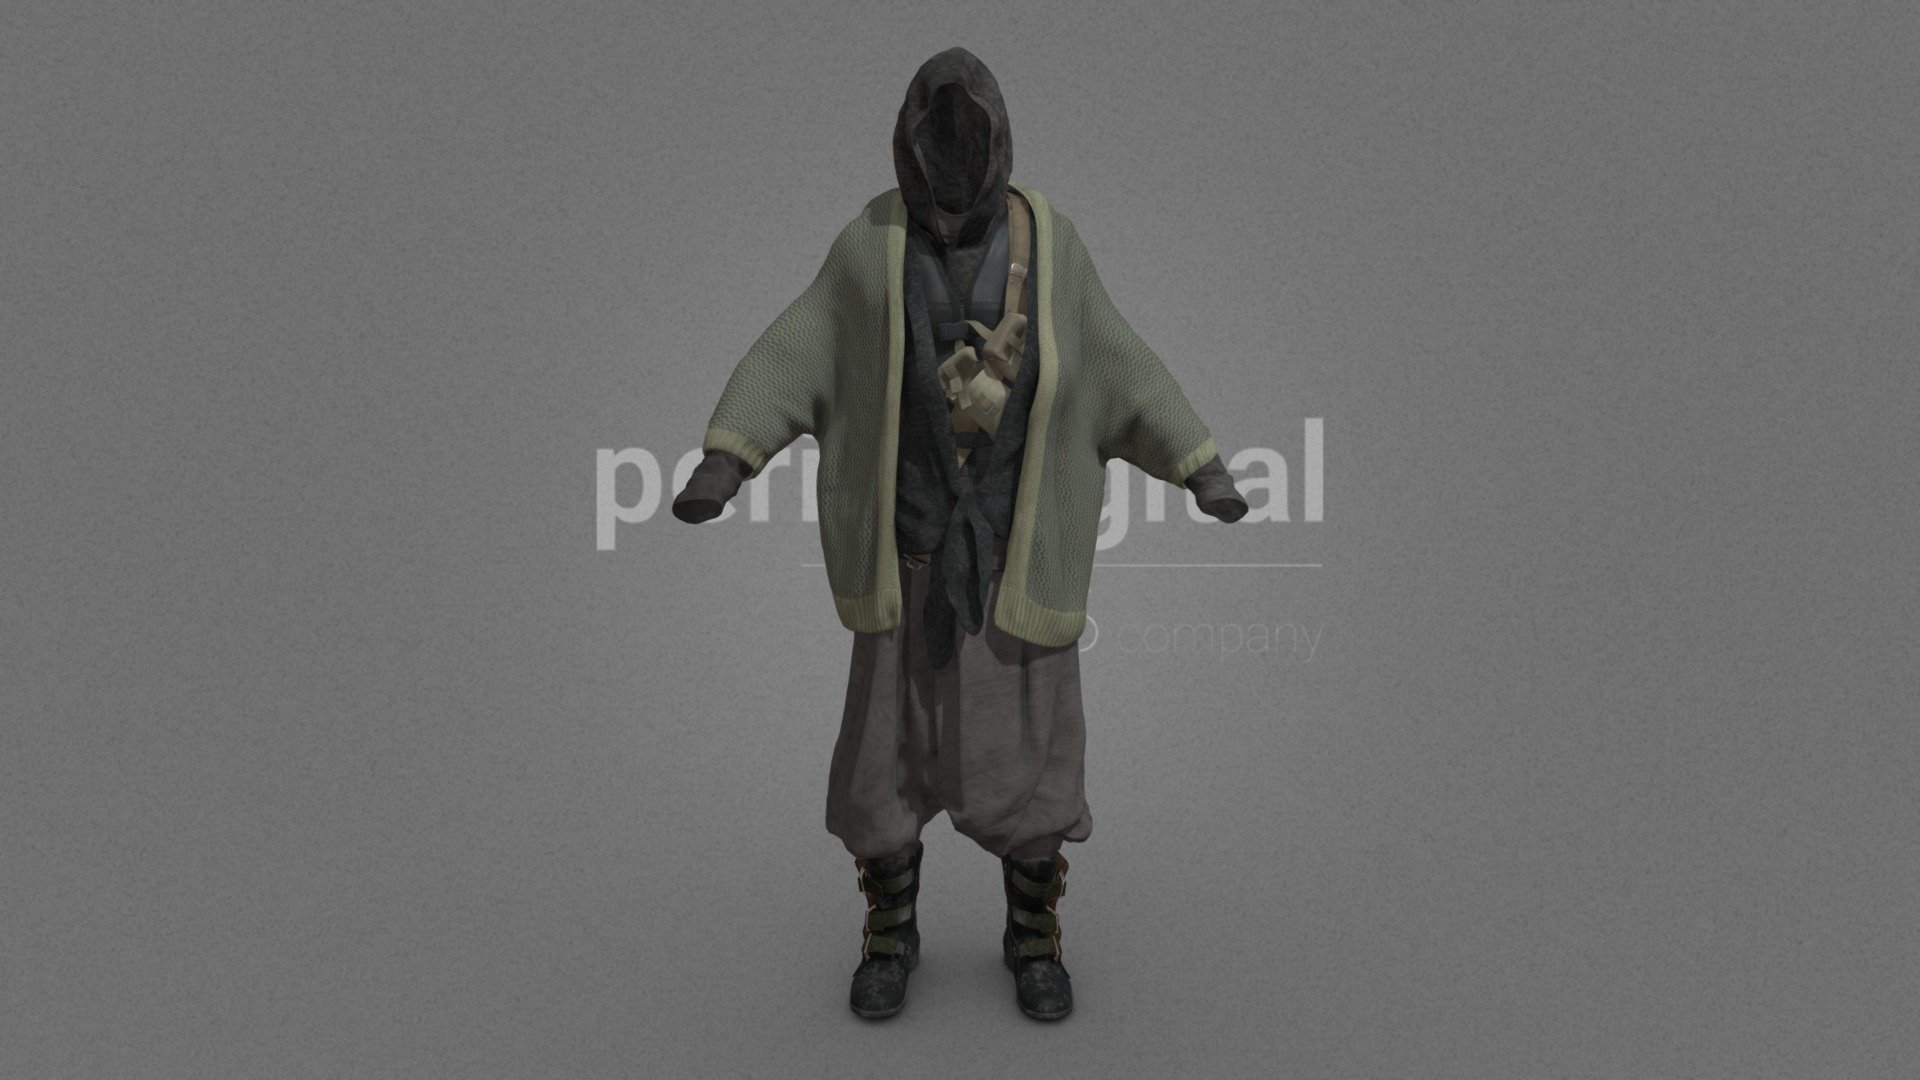 Dark gray hood, gray knitted cardigan, gray military vest with zipper and plastic buckles, dark gray knotted vest, gray turtleneck long sleeve shirt, beige shoulder bag with buckles, gray trousers, black leather military boots with buckles.




They are optimized for use in 3D scenes of high polygonalization and optimized for rendering.

We do not include characters, but they are positioned for you to include and adjust your own character.

They have a model LOW (_LODRIG) inside the Blender file (included in the AdditionalFiles), which you can use for vertex weighting or cloth simulation and thus, make the transfer of vertices or property masks from the LOW to the HIGH** model.

We have included the texture maps in high resolution, as well as the Displacement maps, so you can make extreme point of view with your 3D cameras, as well as the Blender file so you can edit any aspect of the set. 

Enjoy it.

Web: https://peris.digital/ - Wasteland Series - Model 10 - Buy Royalty Free 3D model by Peris Digital (@perisdigital) 3d model